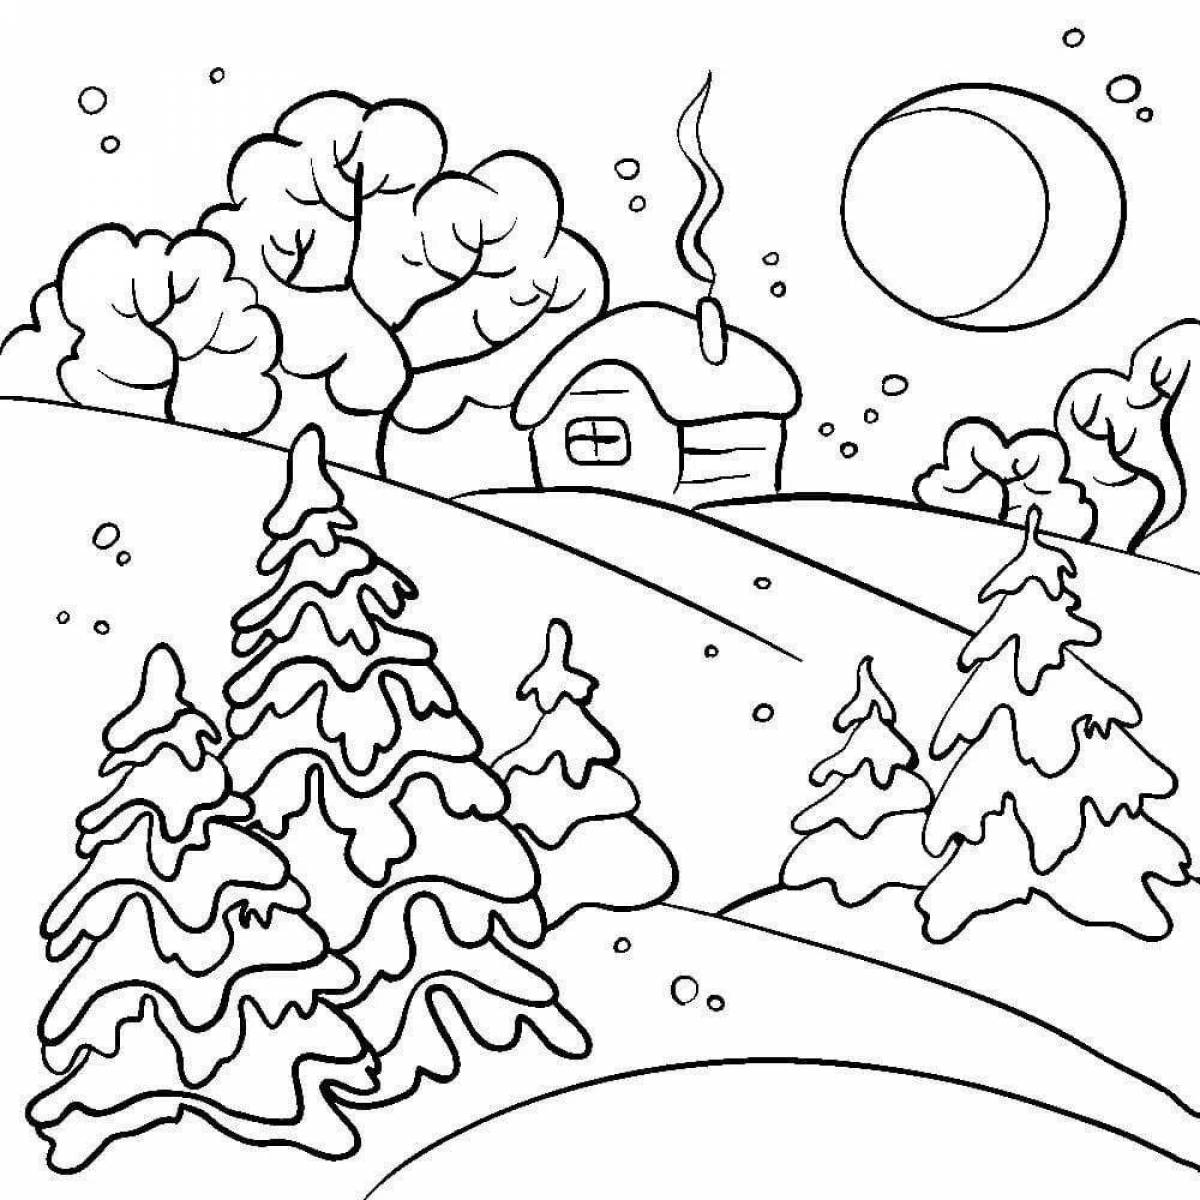 Winter forest drawing #11